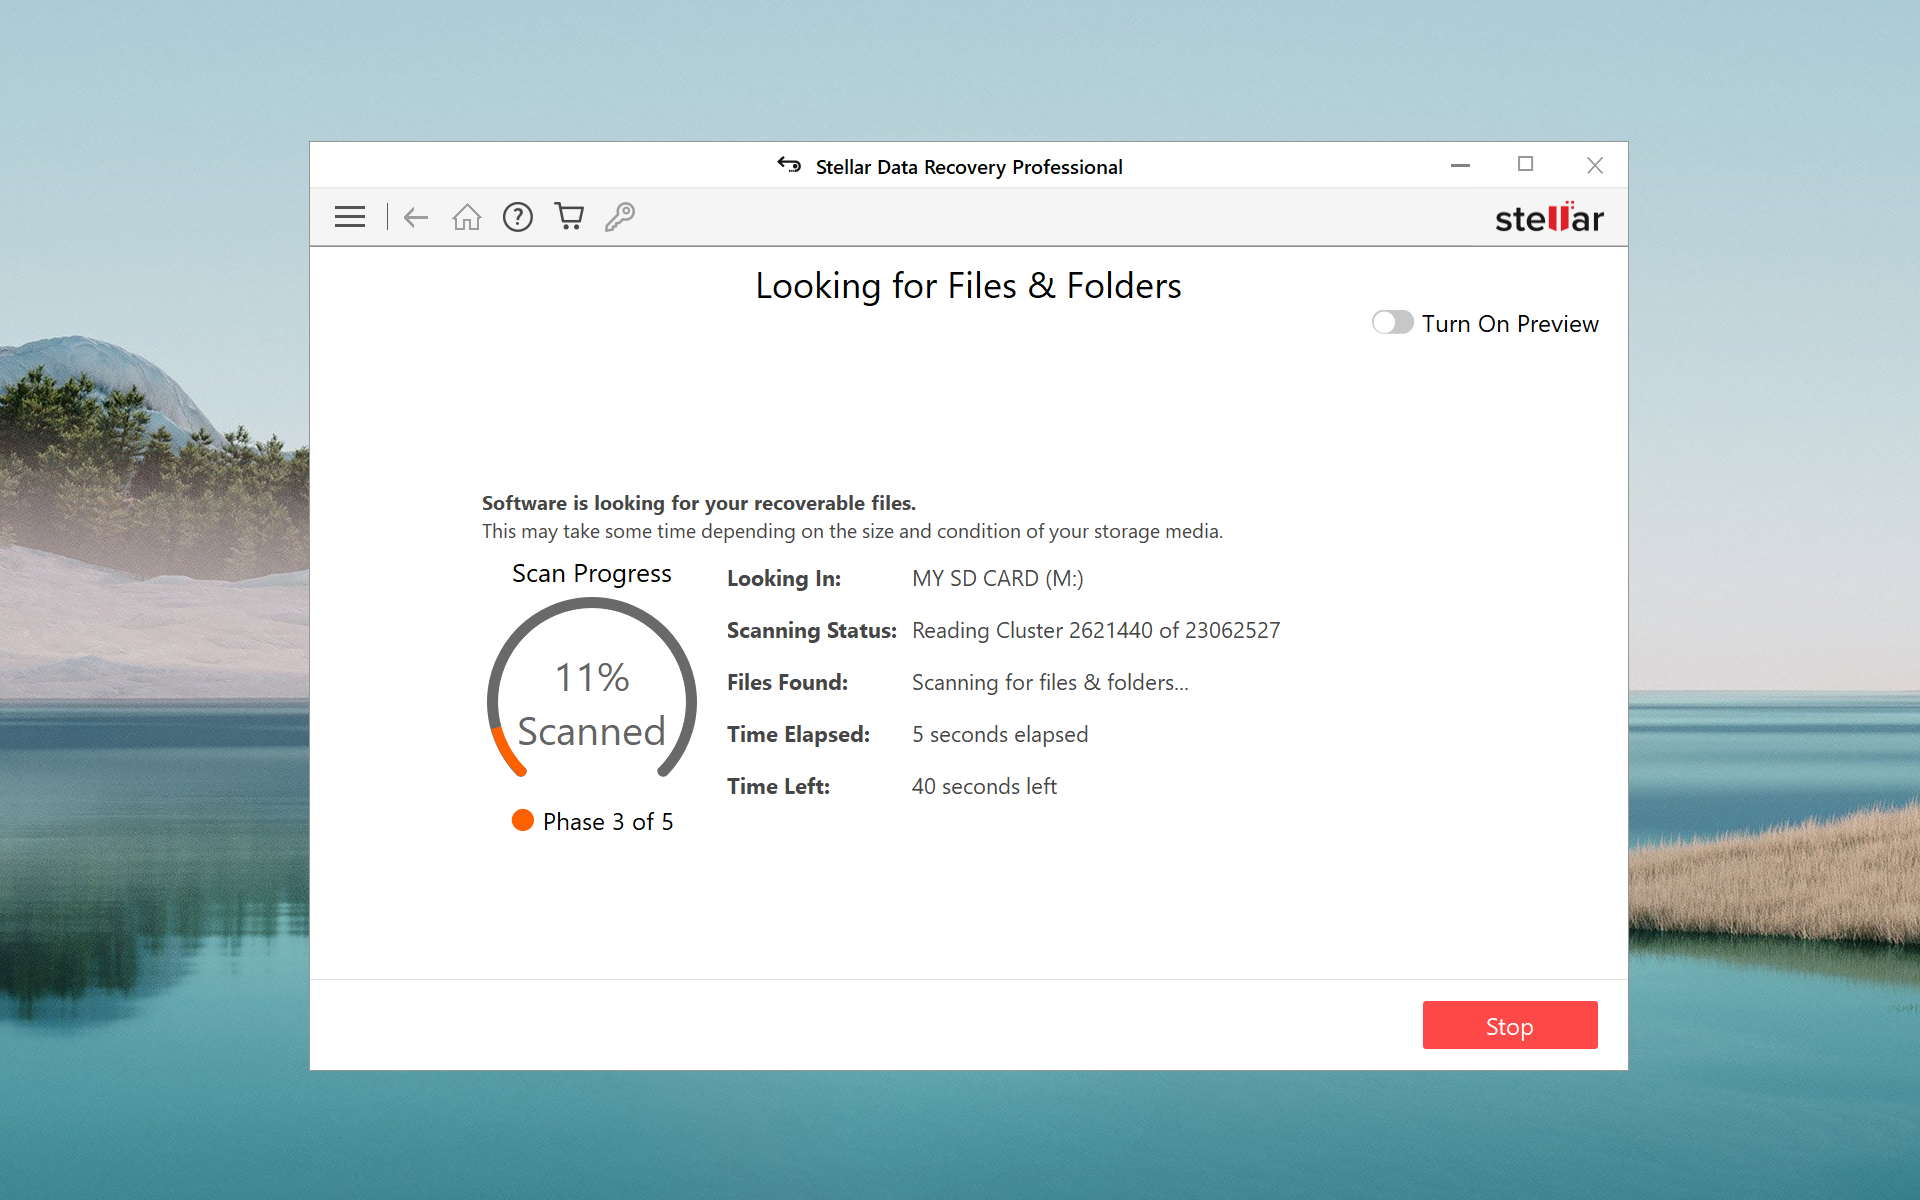 stellar data recovery looking for files and folders